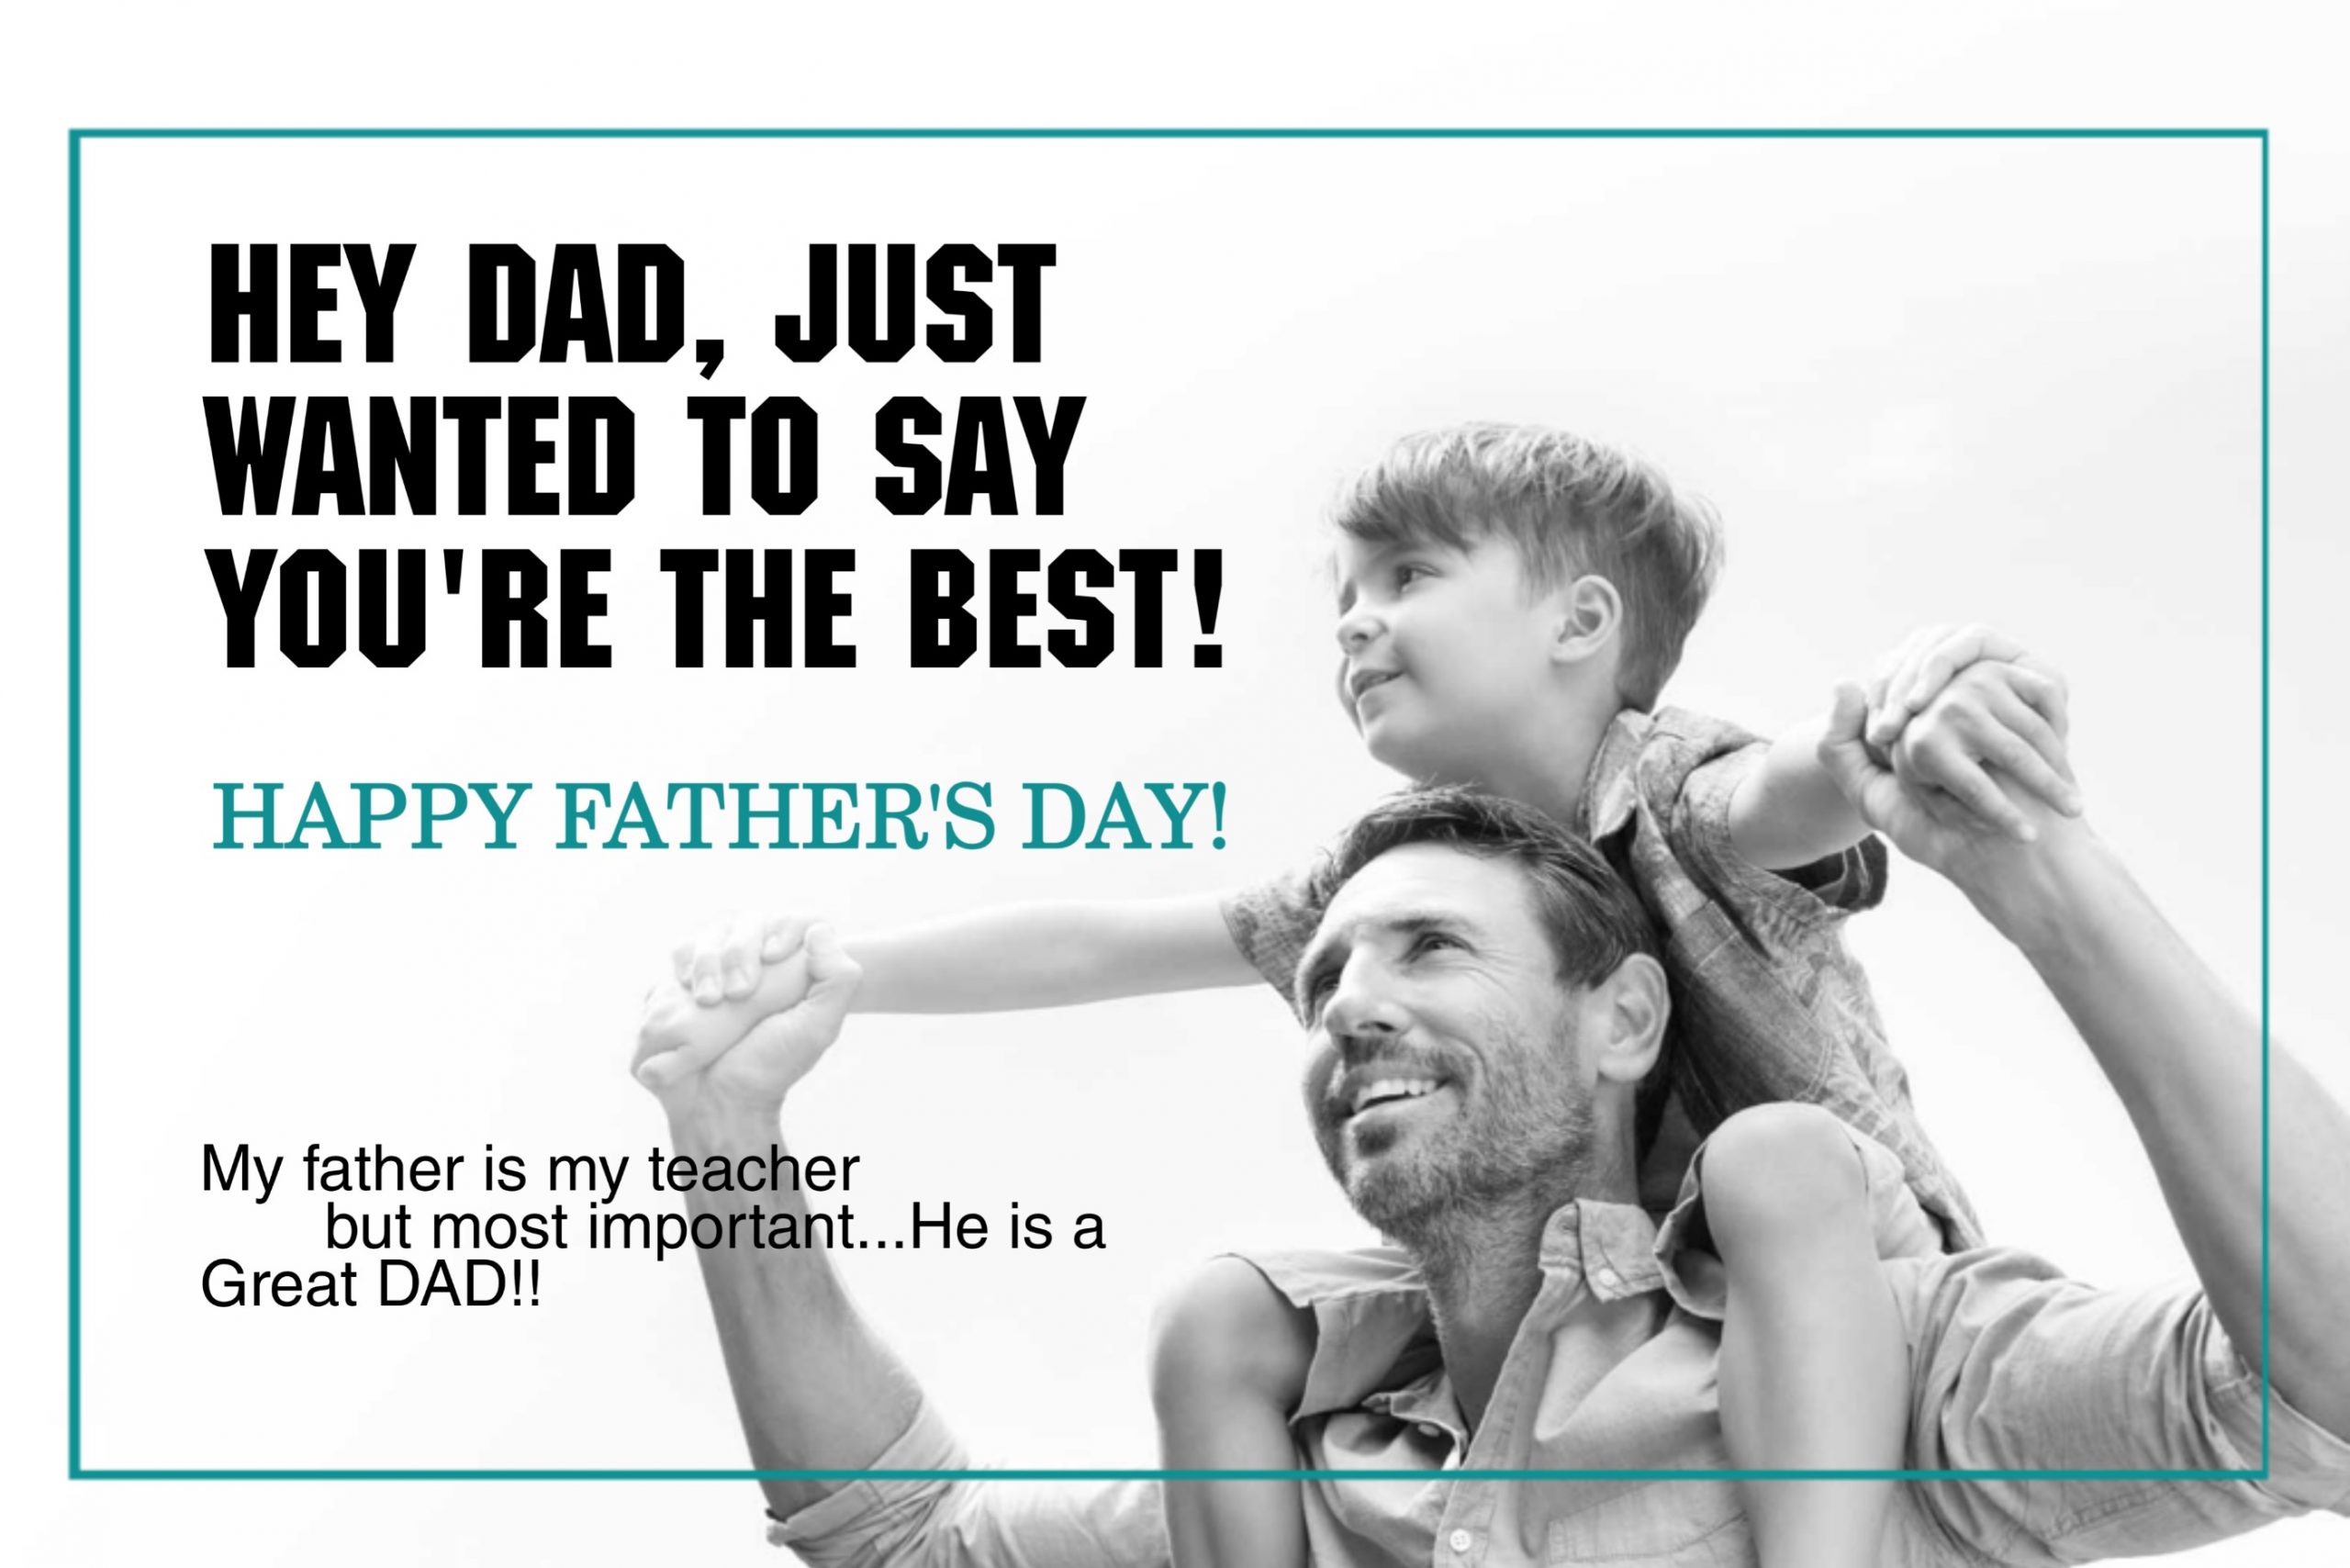 fathers day quotes in hindi